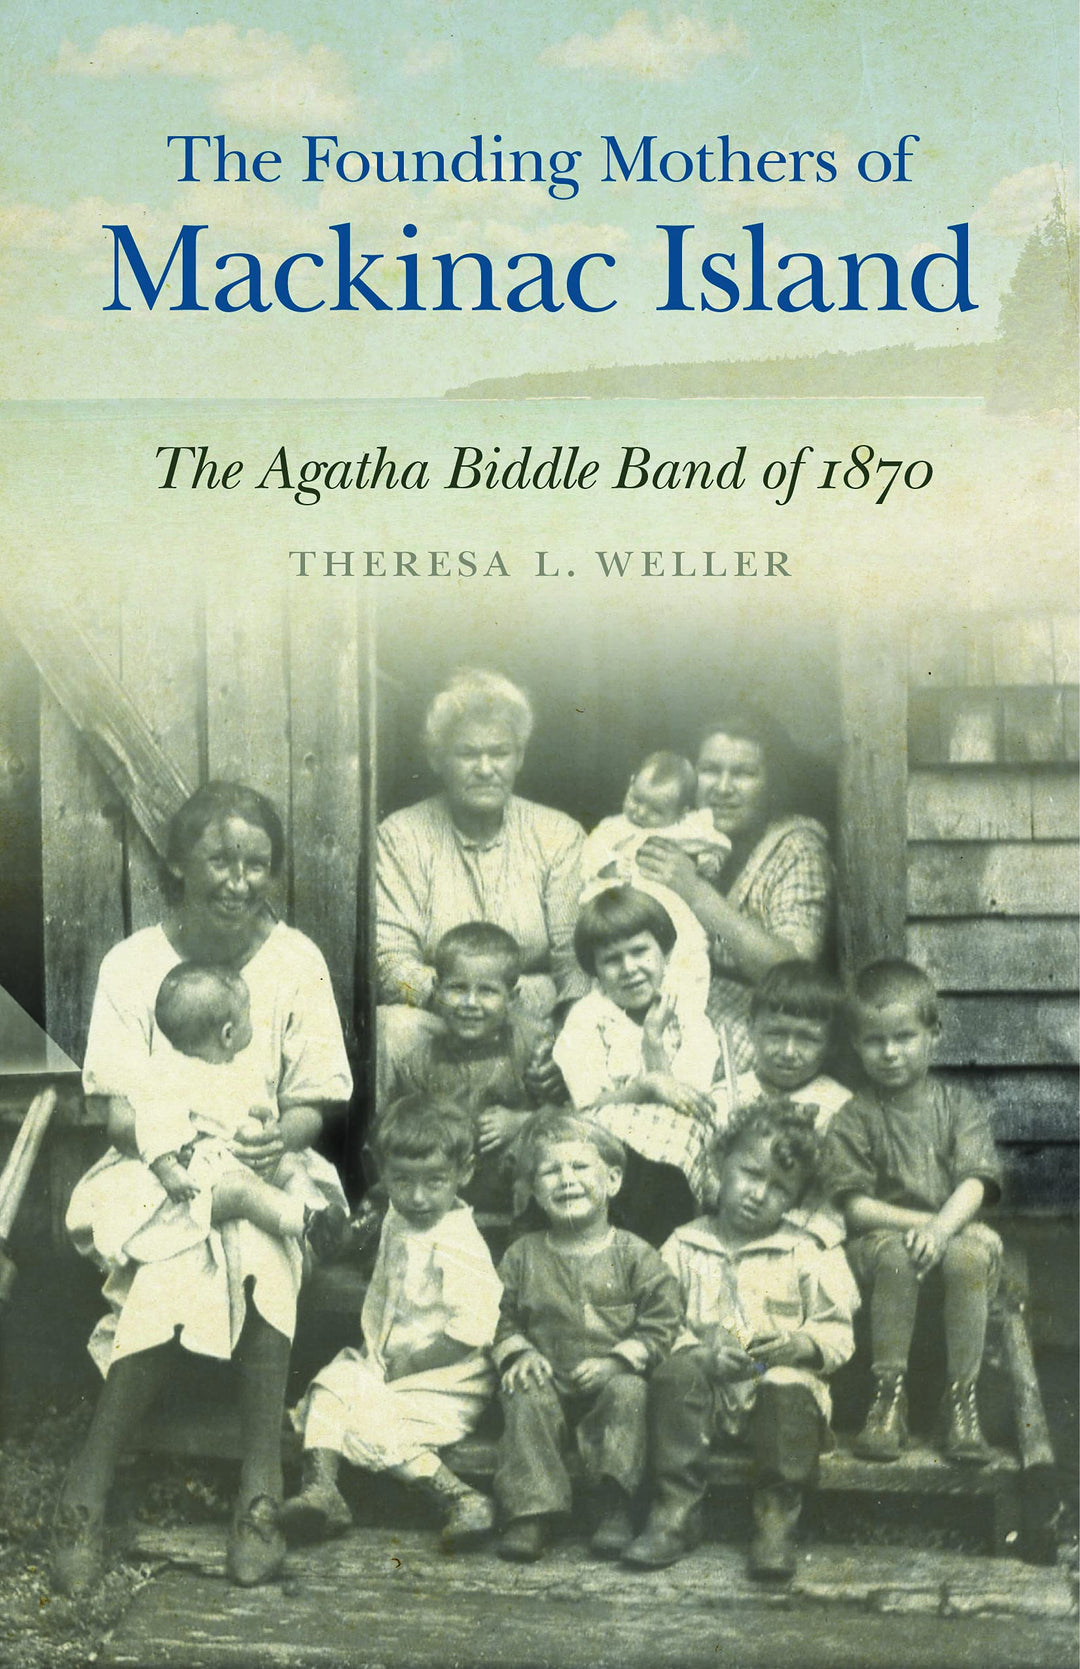  The Founding Mothers of Mackinac Island: The Agatha Biddle Band of 1870 by Theresa L. Weller